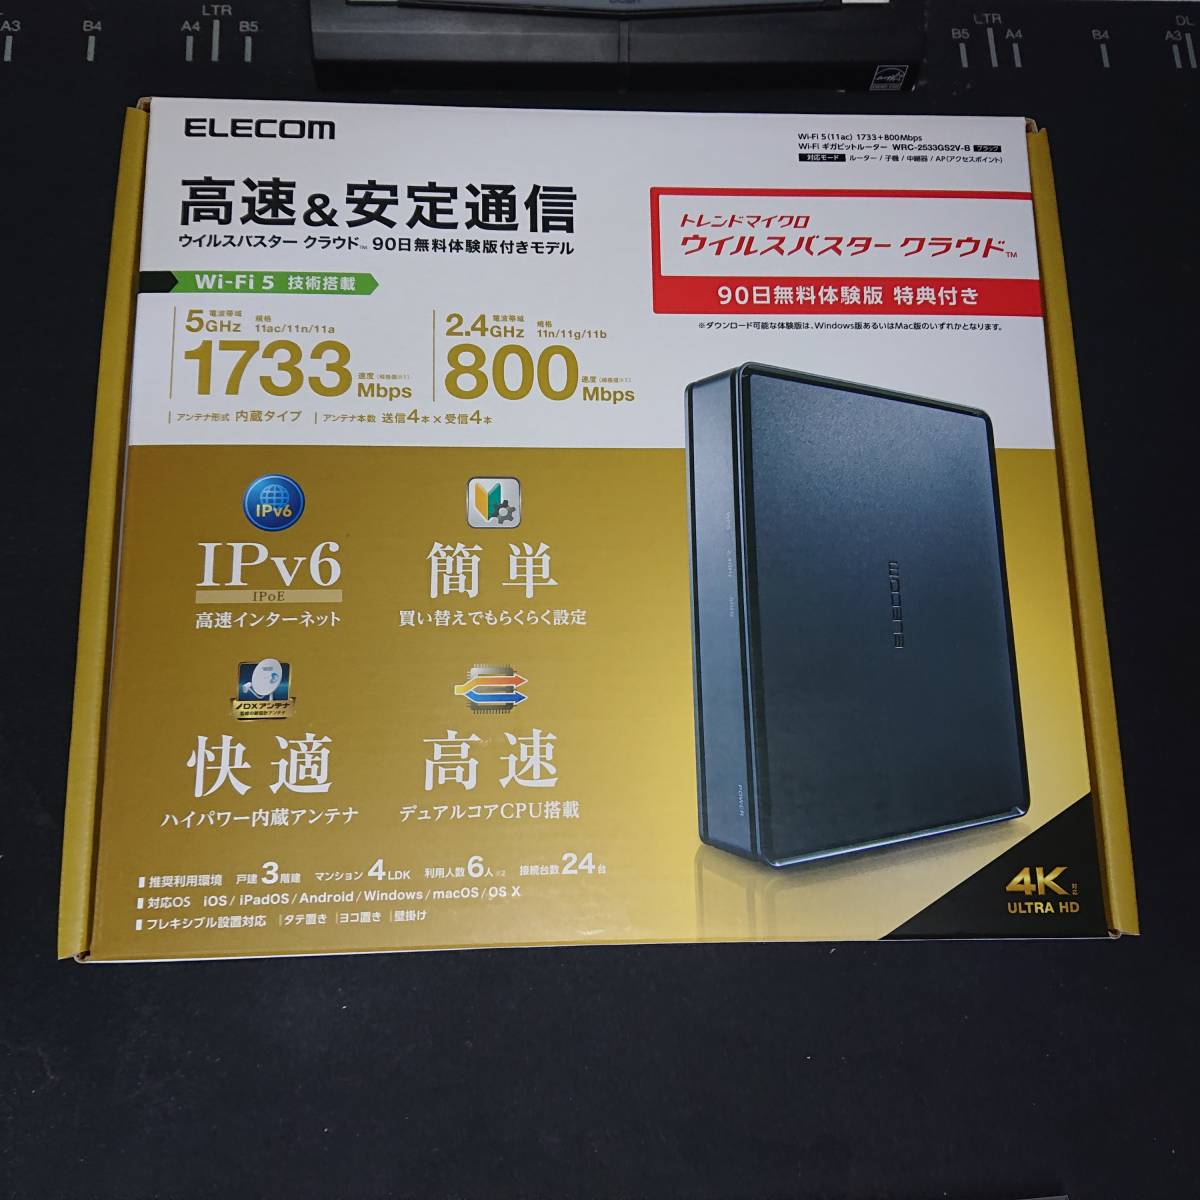 ELECOM エレコム Wi-Fi ギガビット ルーター WRC-2533GS2V-B 2022年１月購入 product details |  Yahoo! Auctions Japan proxy bidding and shopping service | FROM JAPAN